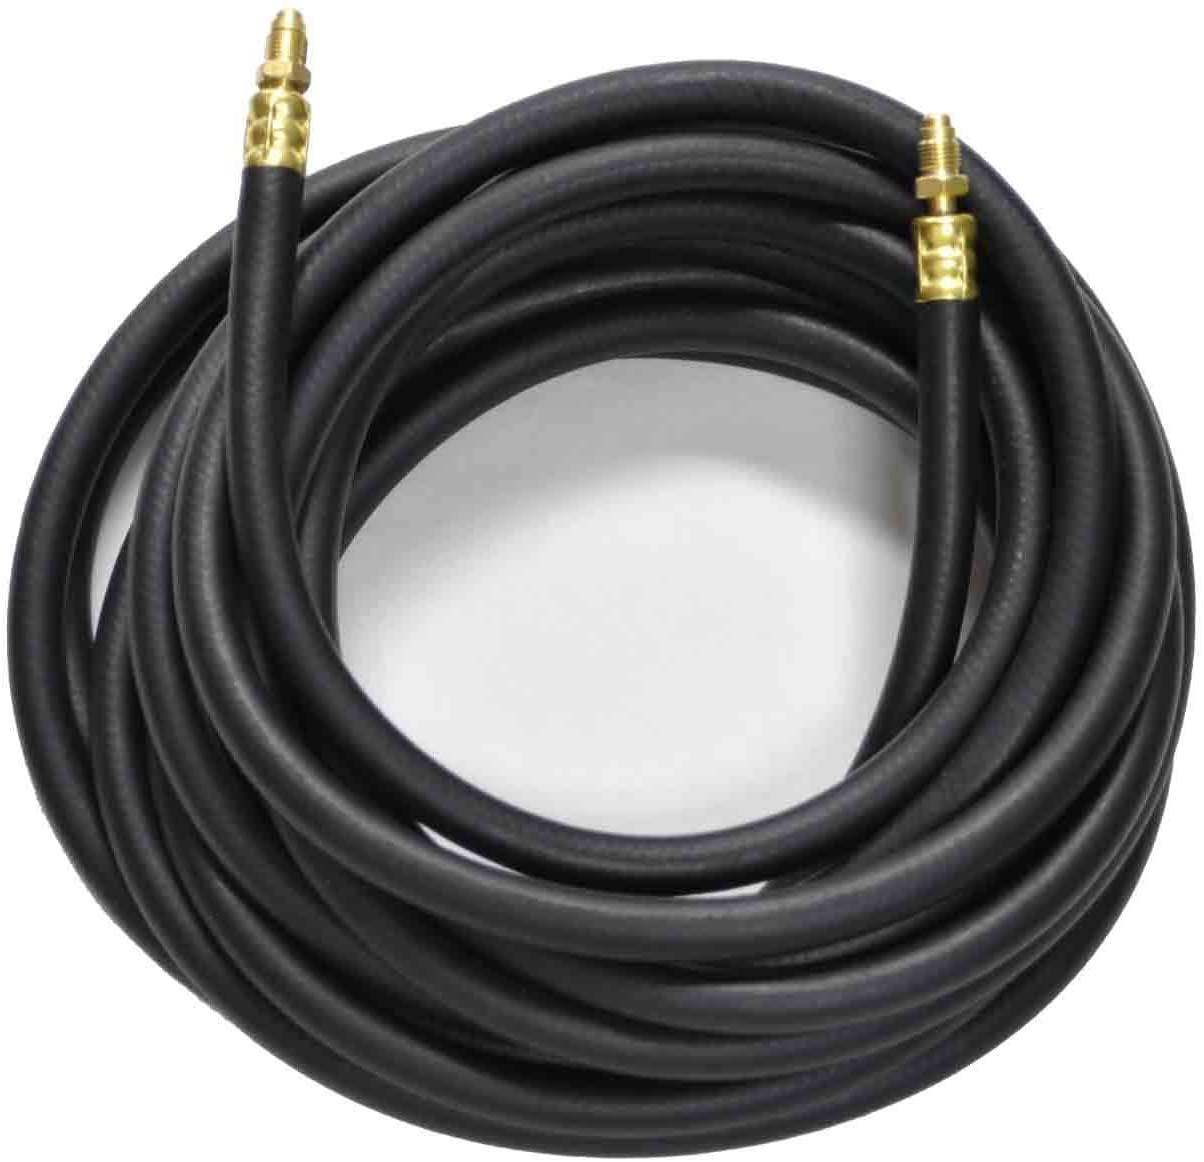 CK Worldwide Standard Power Cable -57Y03R 25 ft. (3.8m) Type/Brand/Model: CK9, CK17, WP-150, WP-24, WP-9, WP-9V, WP-17, WP-17V Series Torches